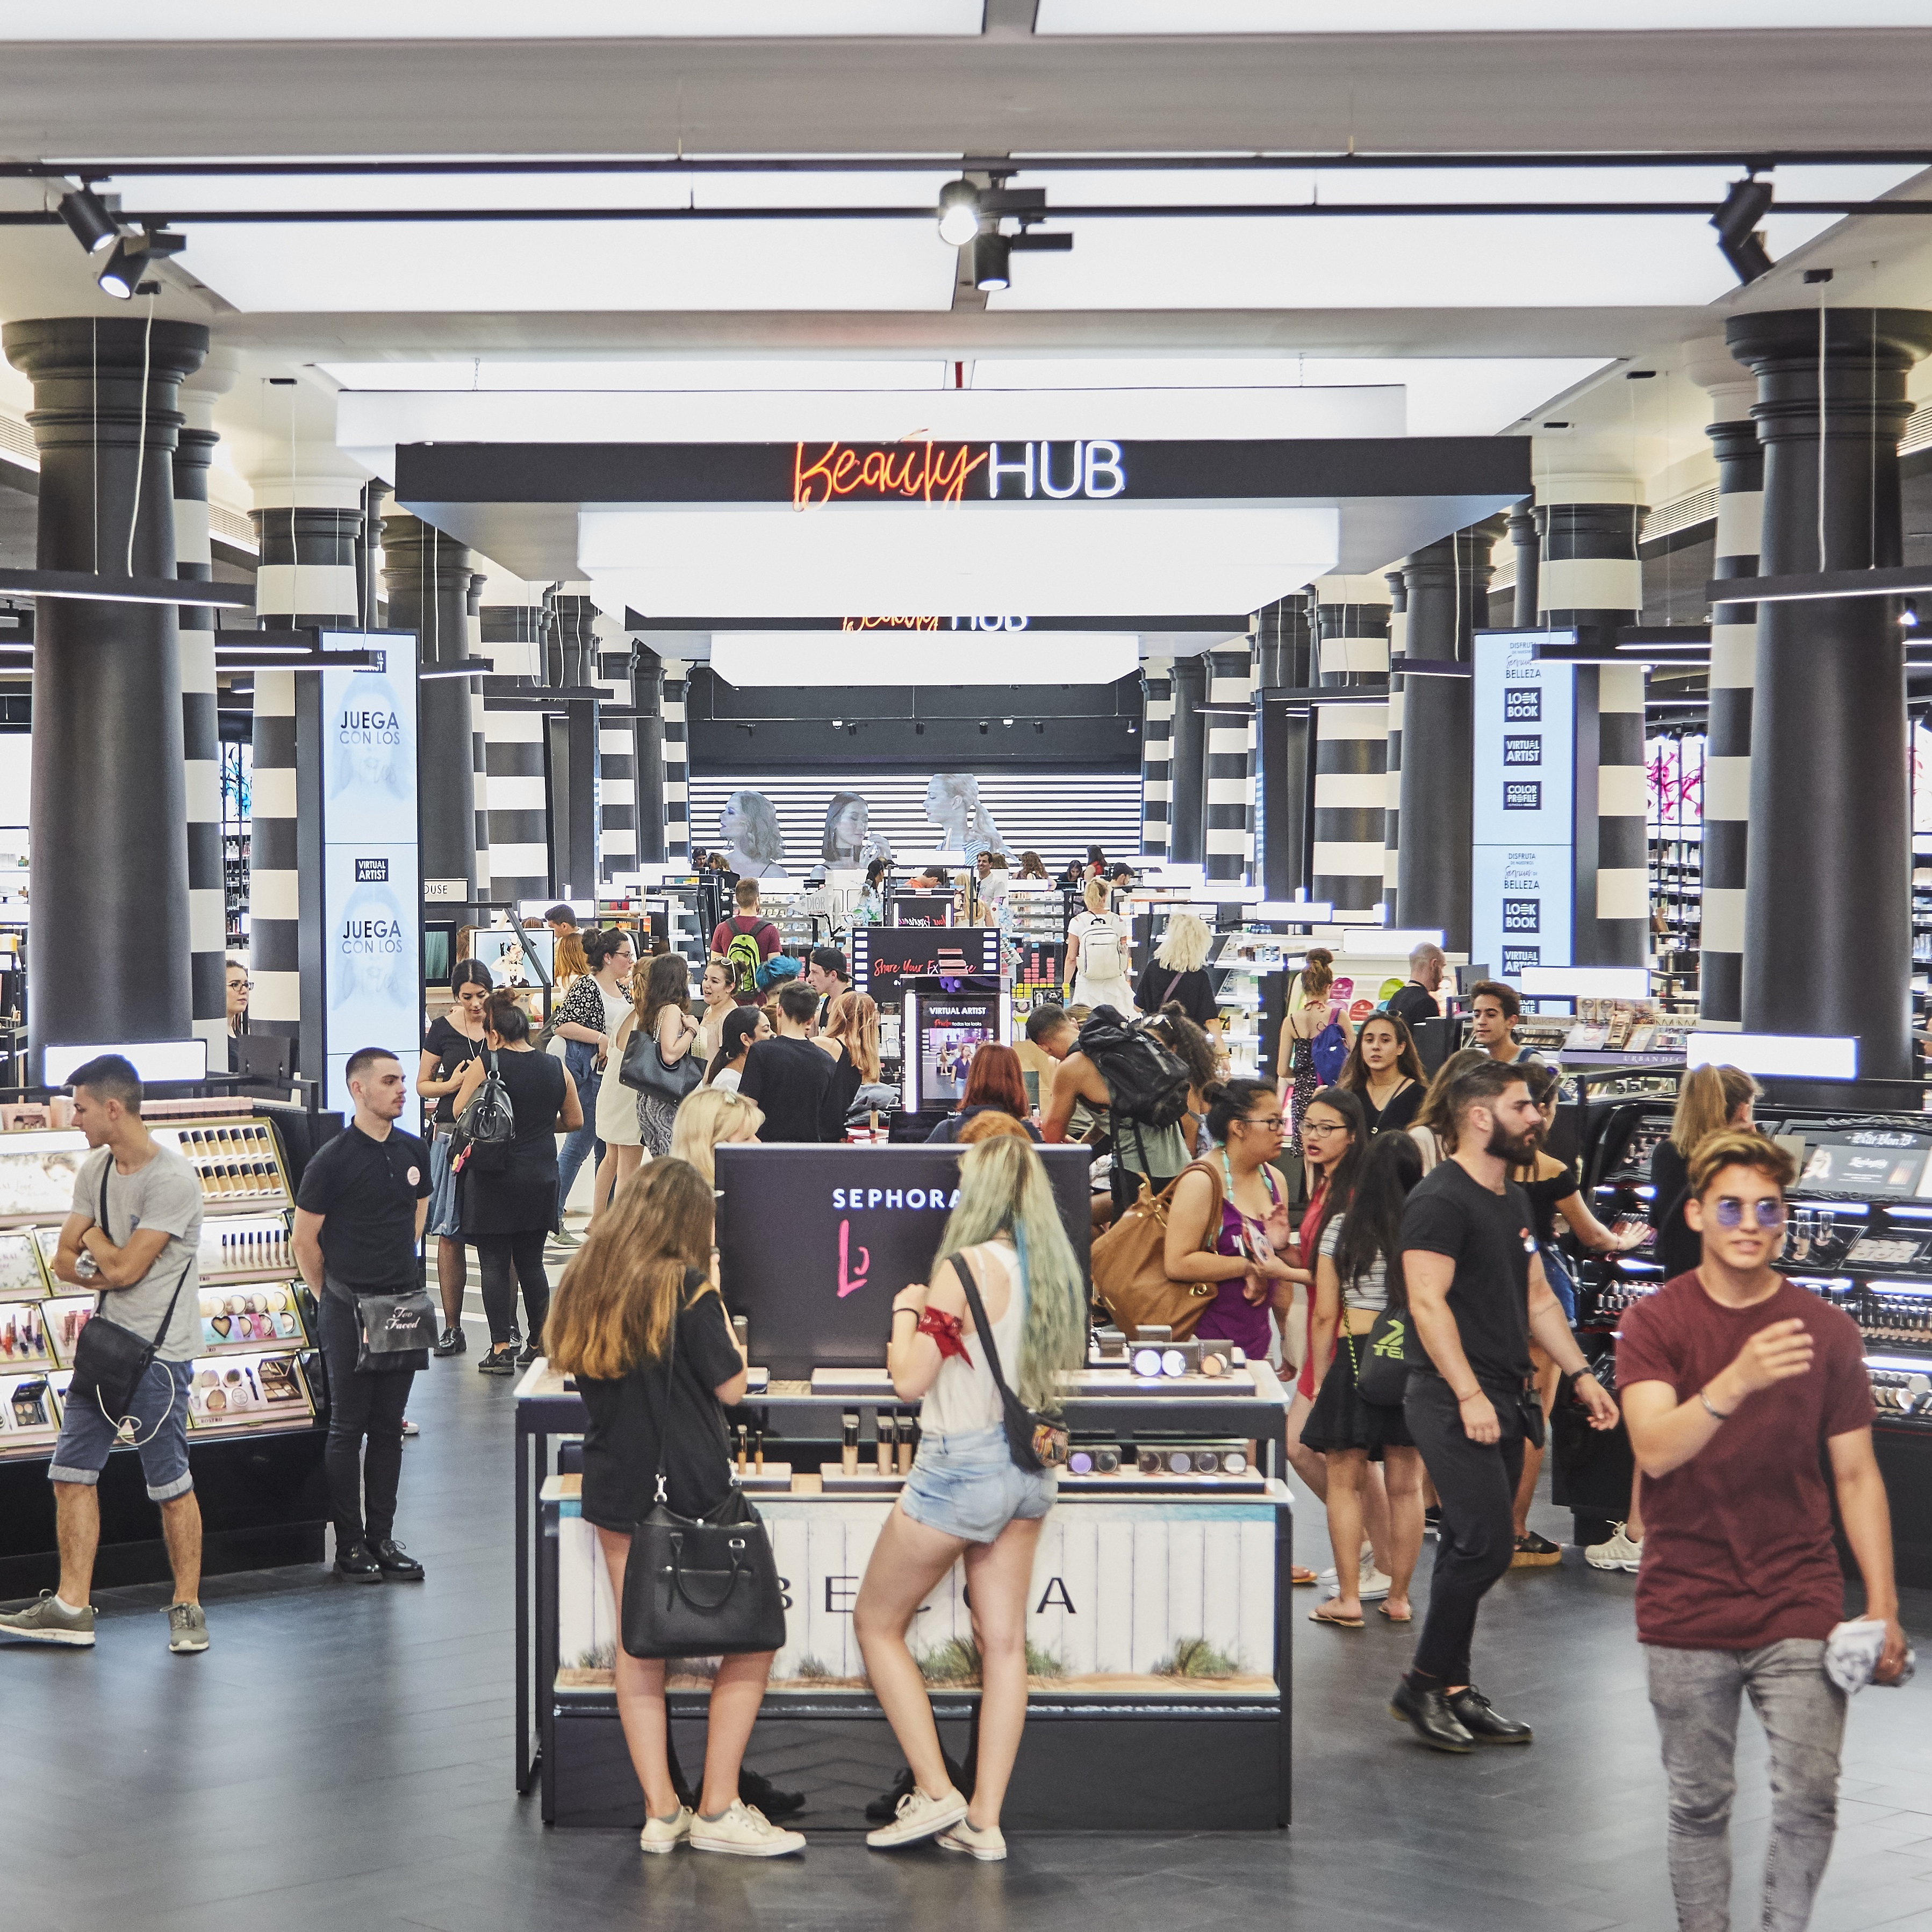 Shopping experience at the Sephora New Store Concept in El Triangle | Barcelona Shopping City